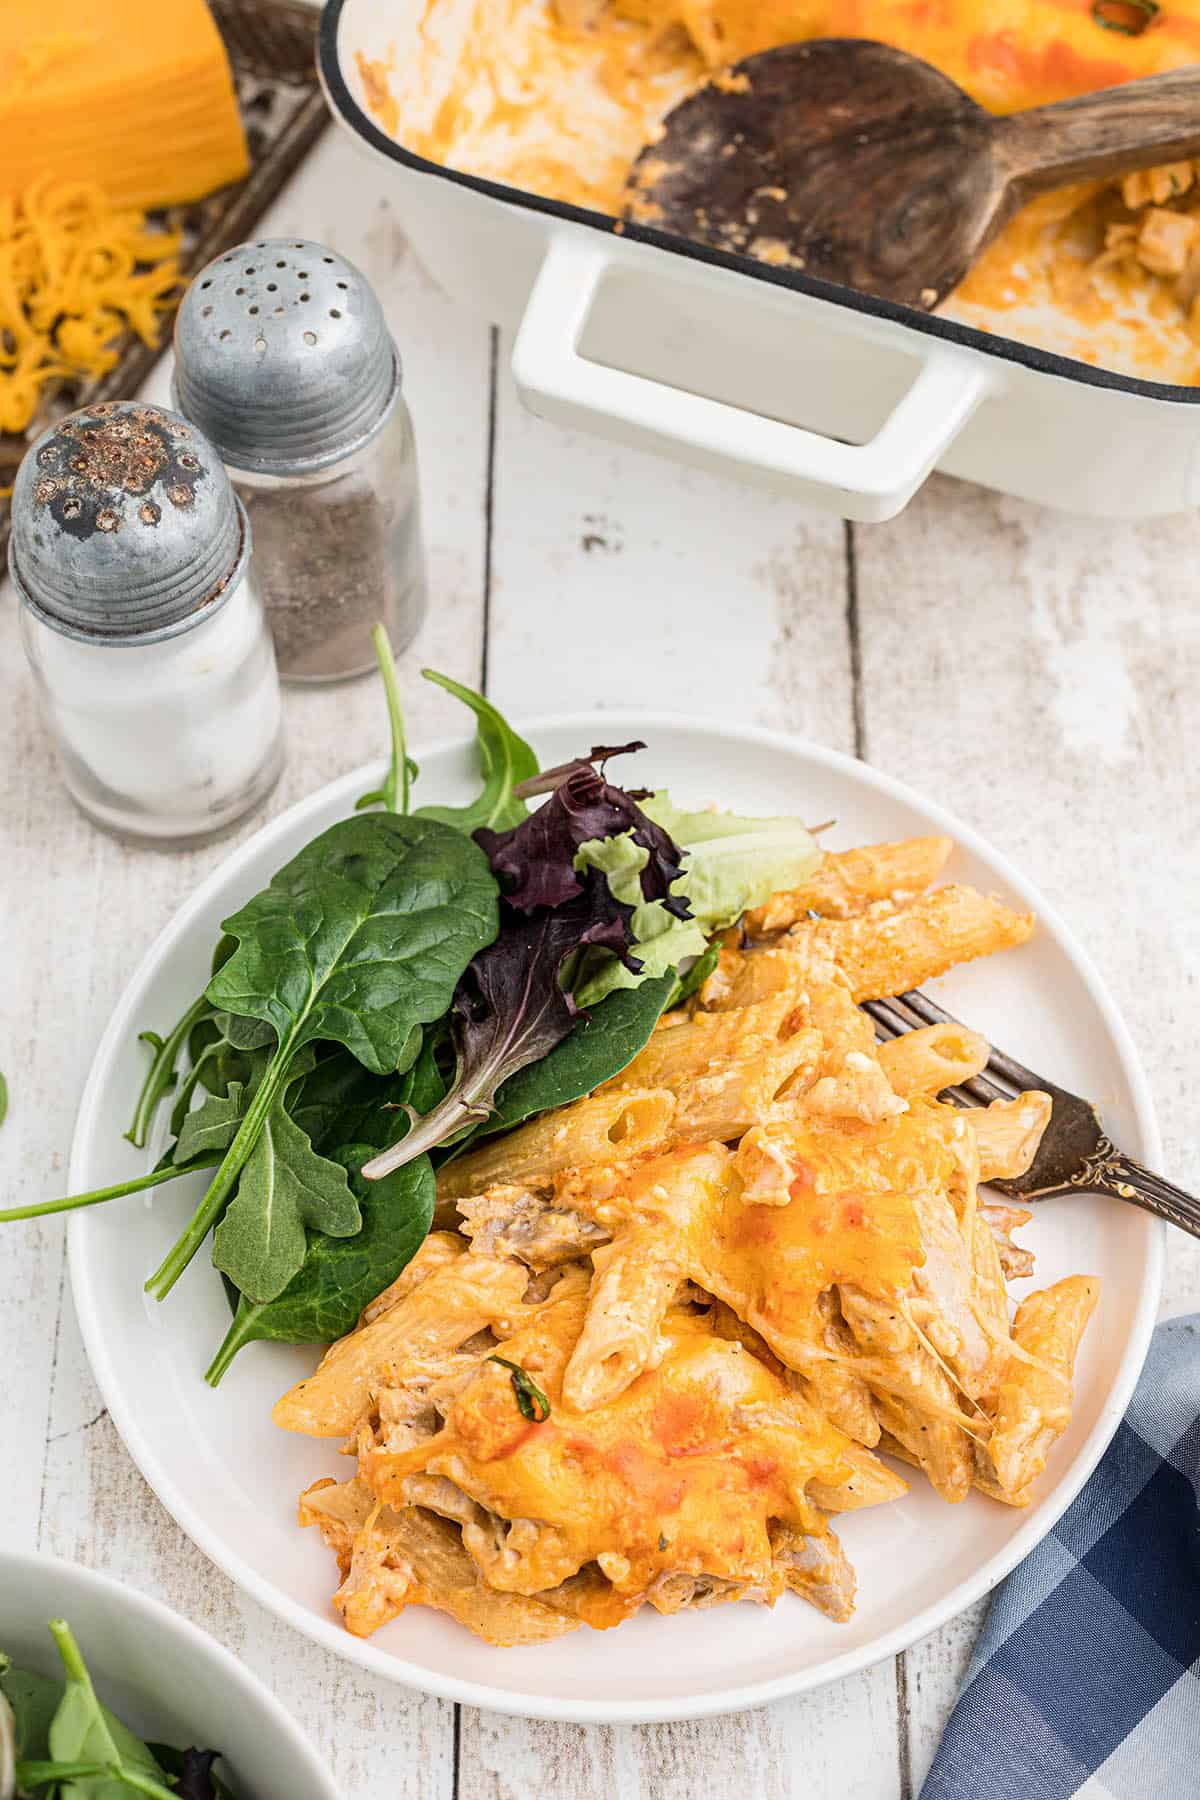 Cheesy Buffalo Chicken Pasta Bake on a plate with a salad.